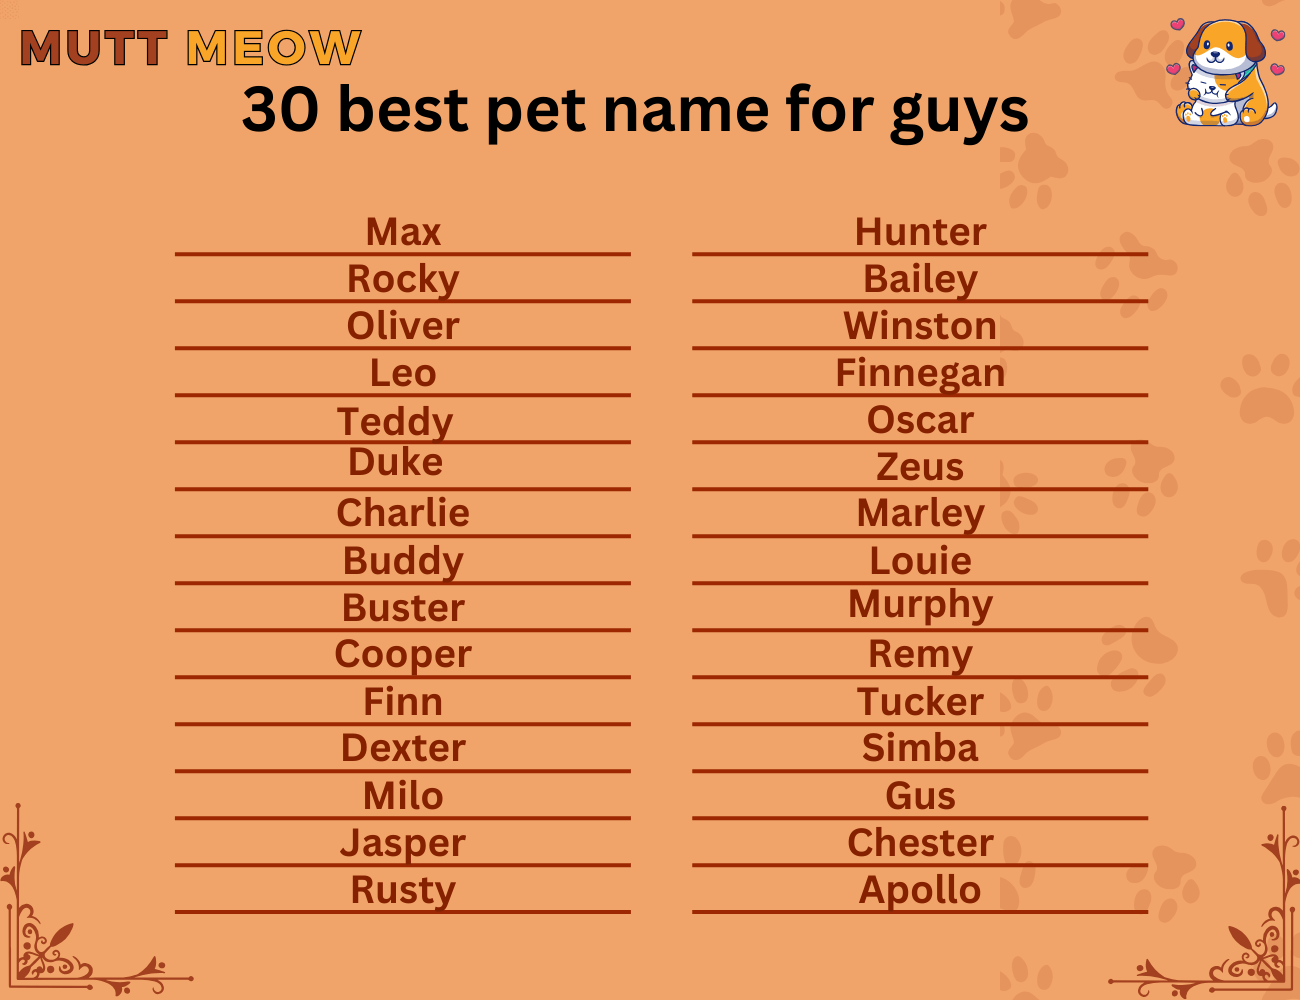 30 best pet name for guys